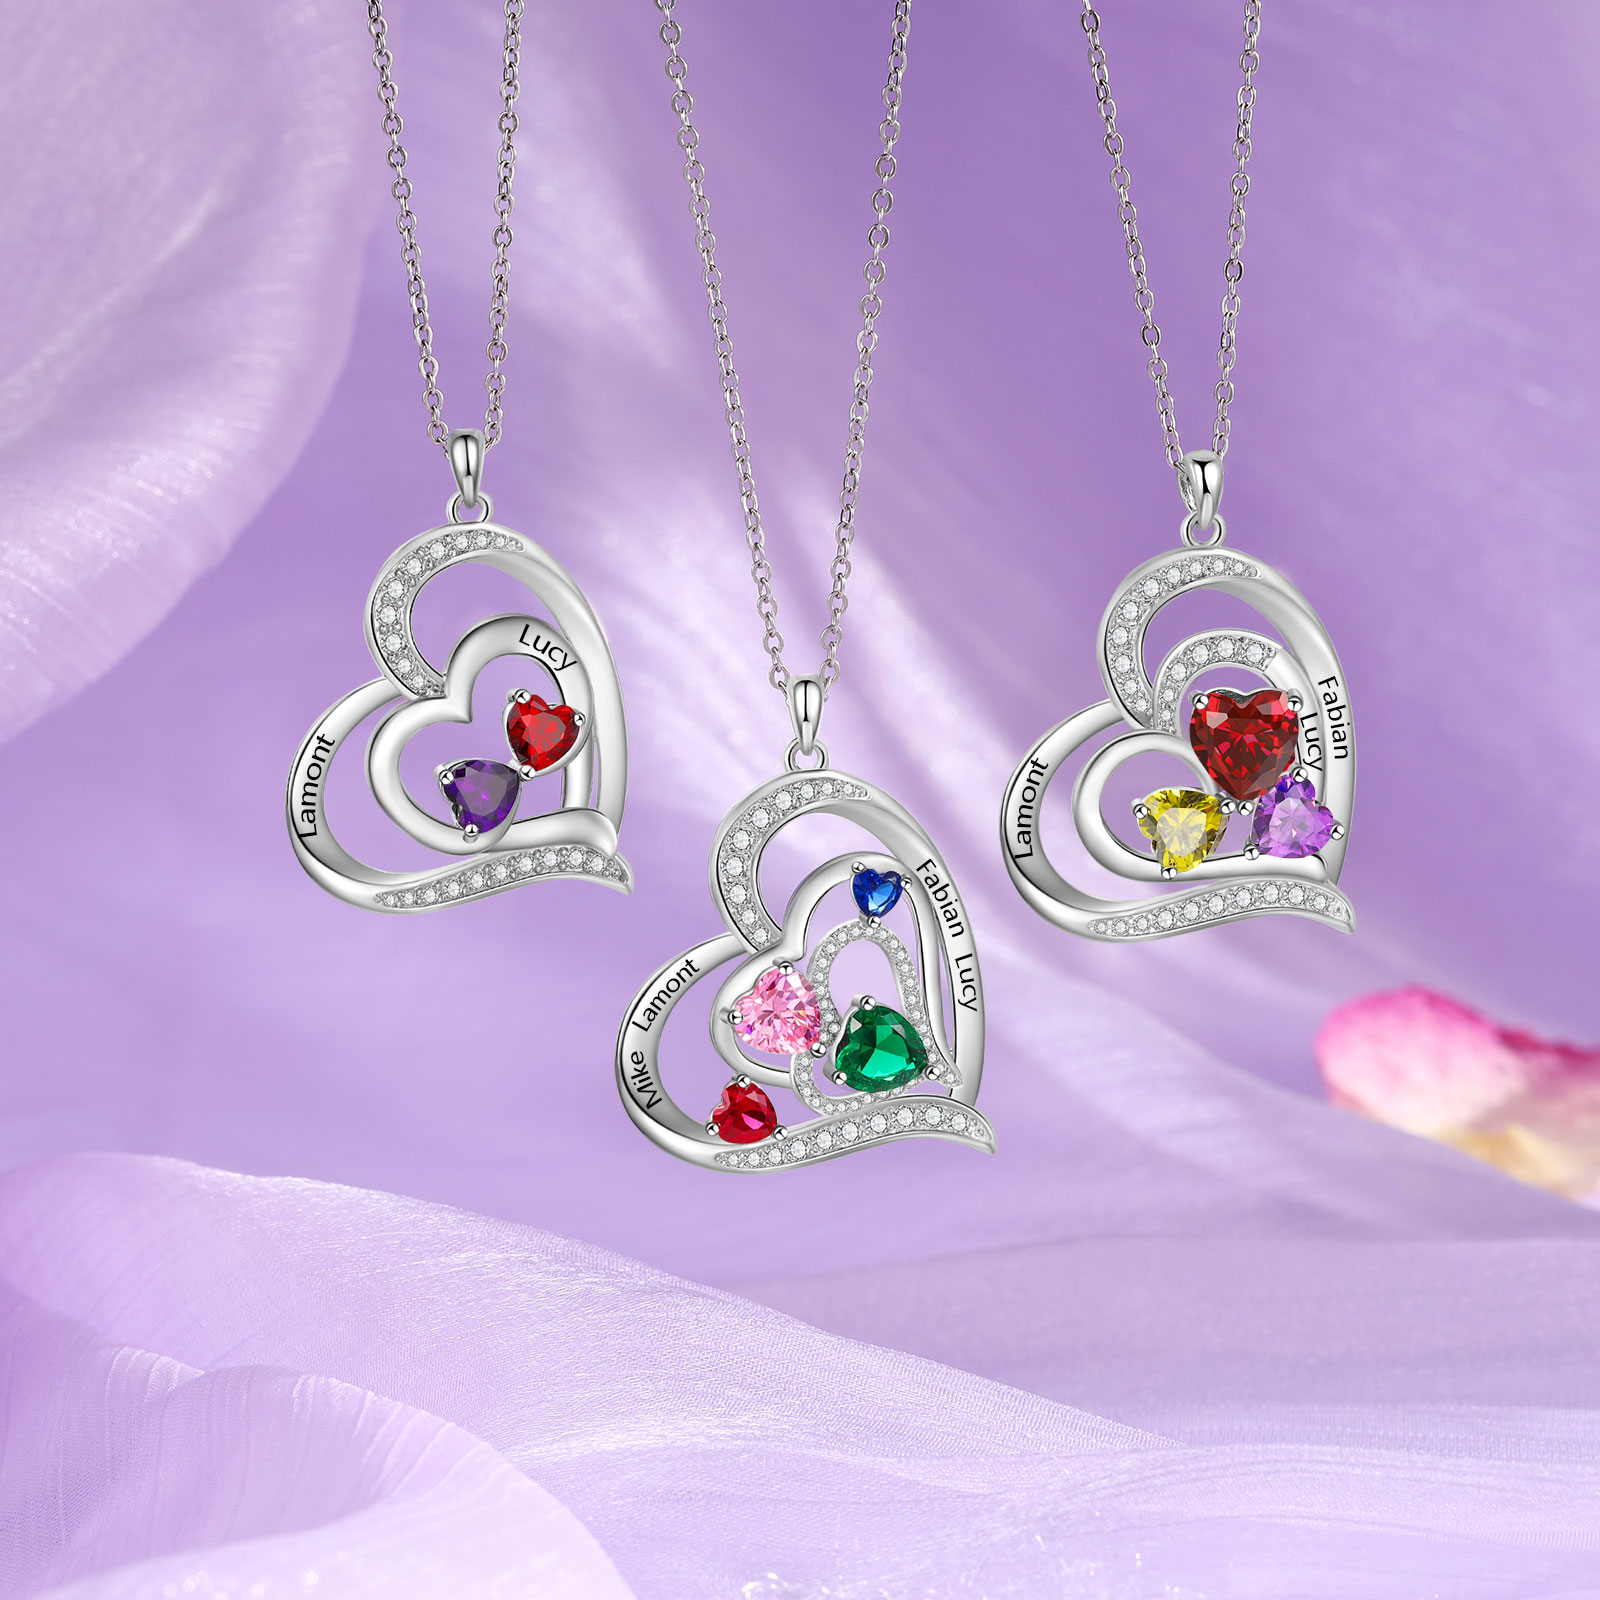 4 Names - Personalized Heart Necklace with Customized Names and Birthstone Gift for Her